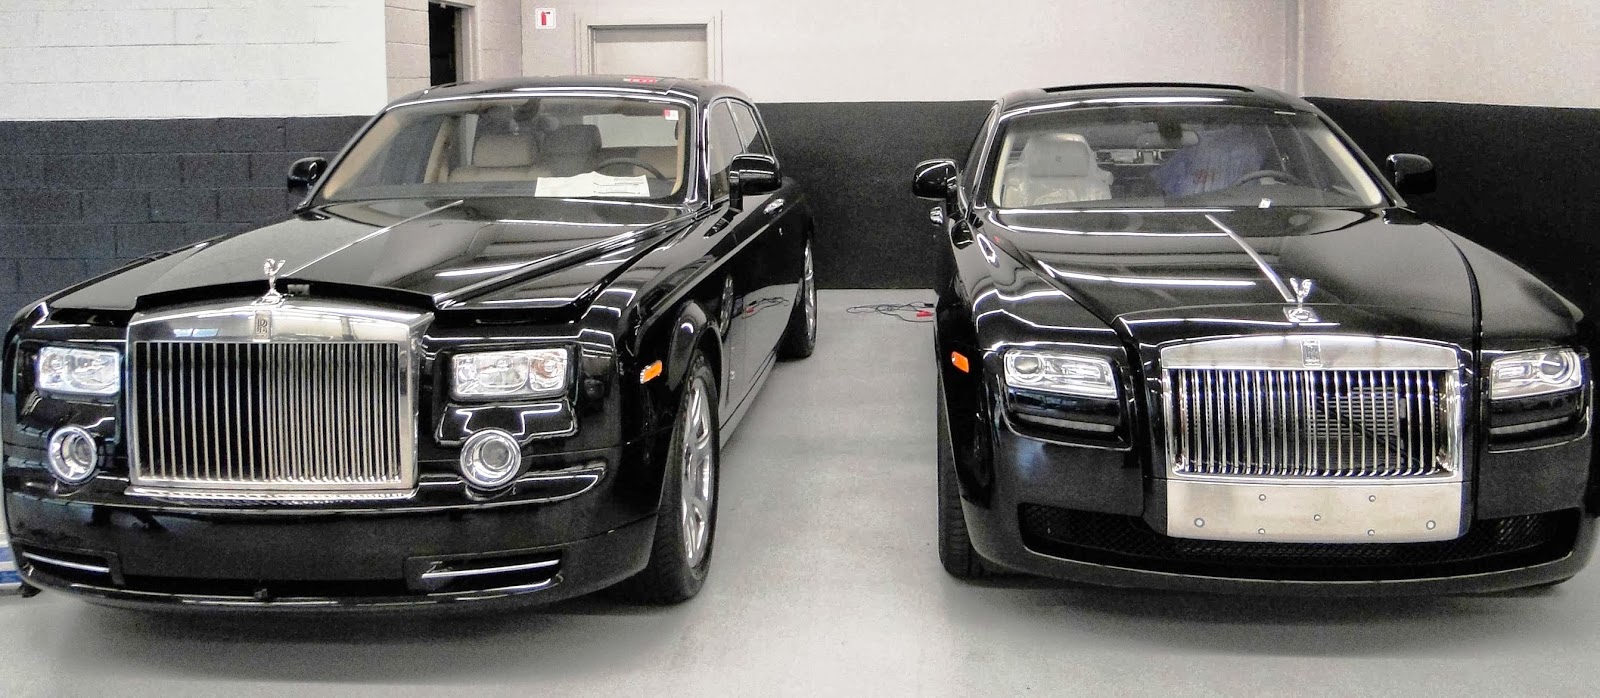 Automobiles Base: Rolls Royce Ghost vs Phantom with Specifications